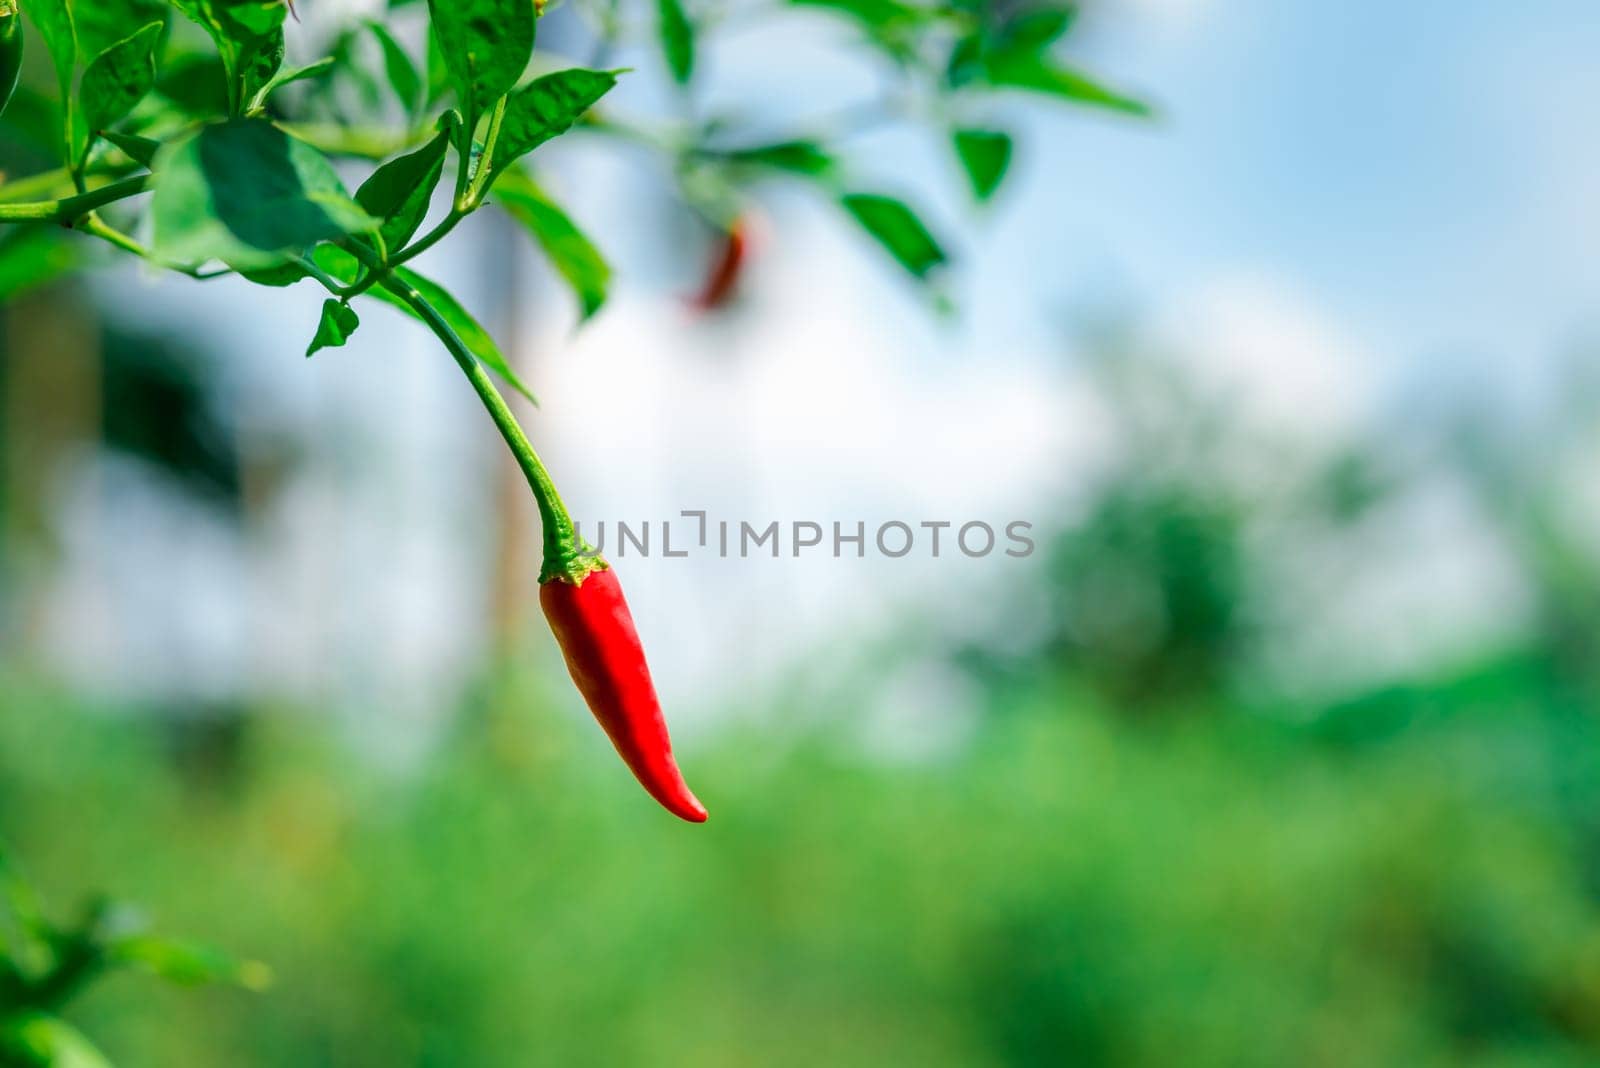 Chilli peppers or red chilies in farm gardening is vegetable use for ingredient of Thai food